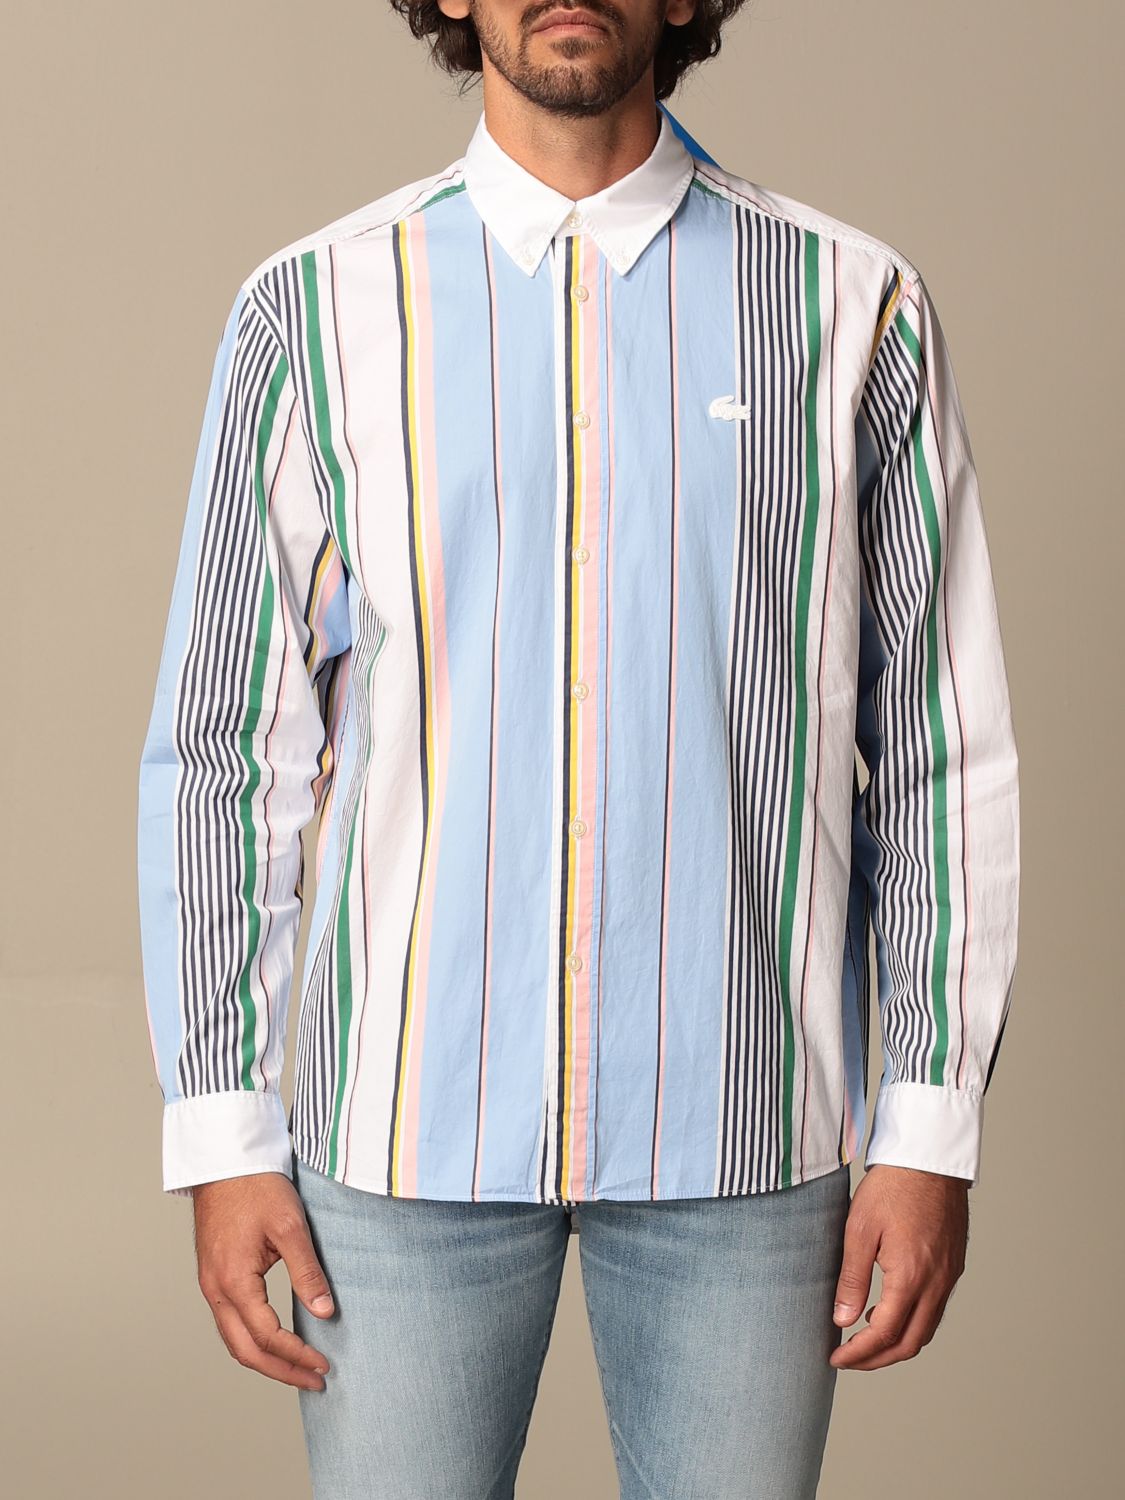 LACOSTE shirt for man - Multicolor | Lacoste L!Ve CH1928 on GIGLIO.COM